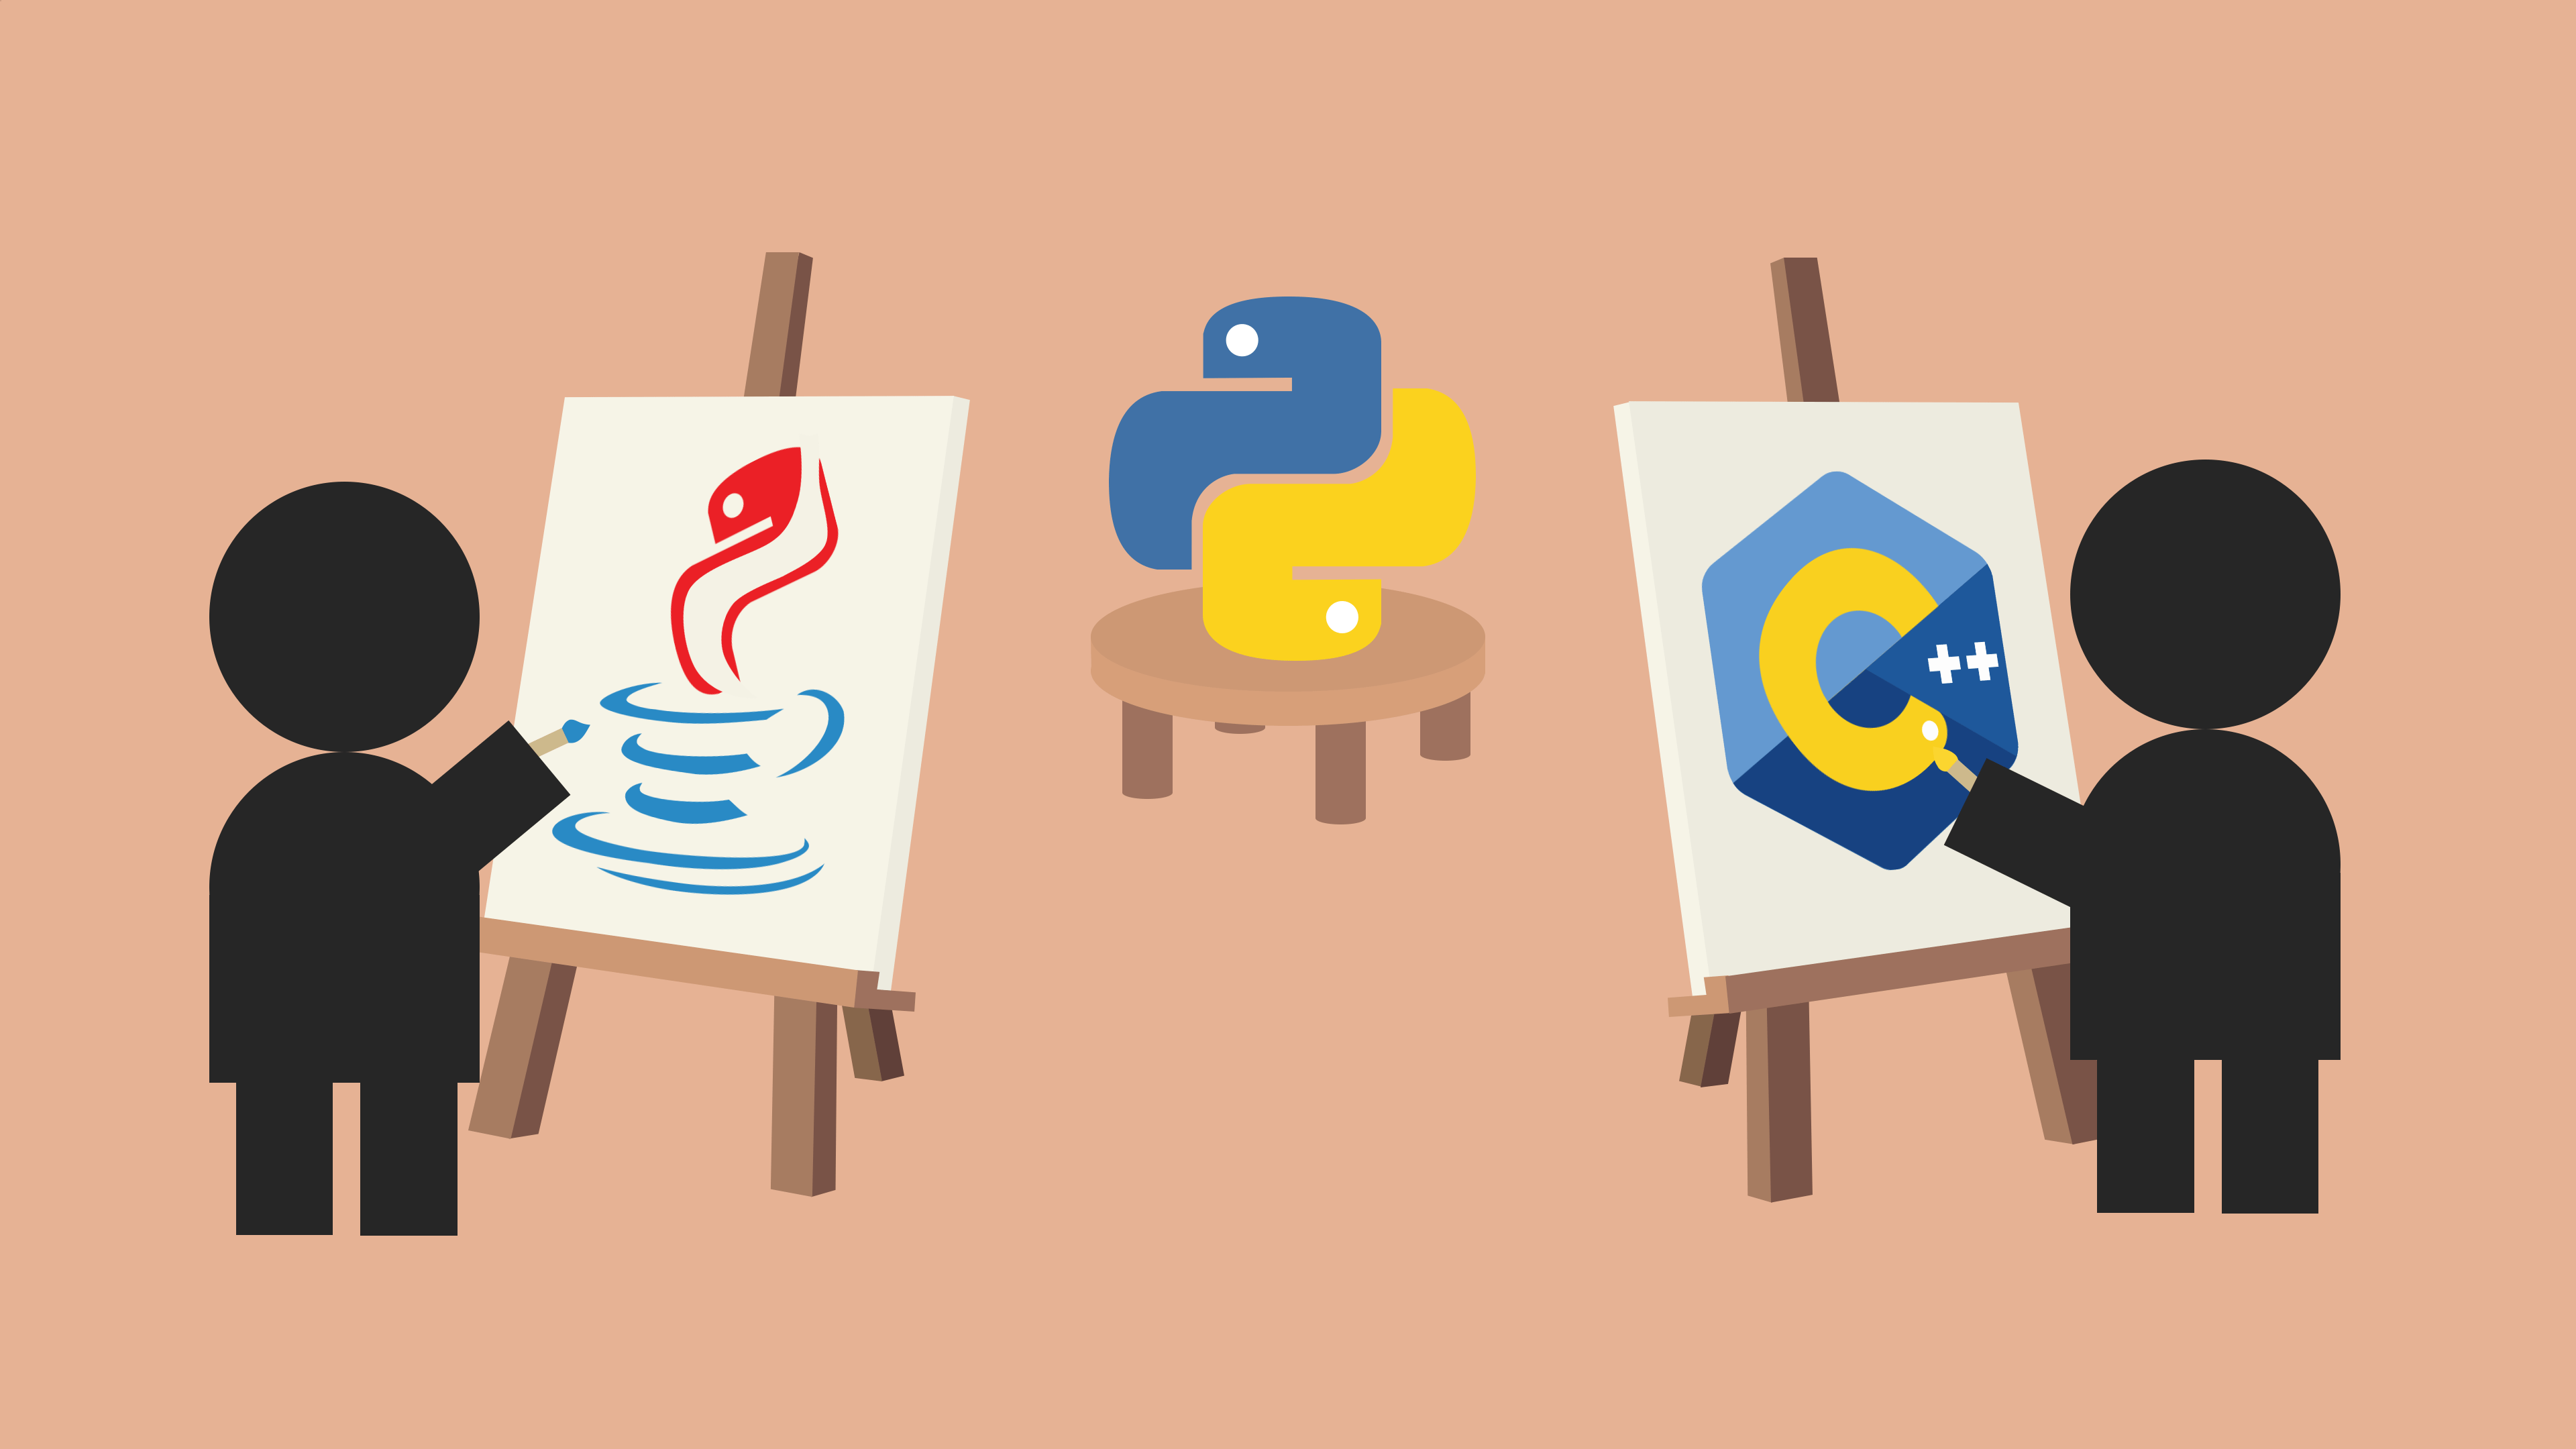 Two artists try to paint the Python logo. One looks like the Java logo, the other like the C++ logo.
